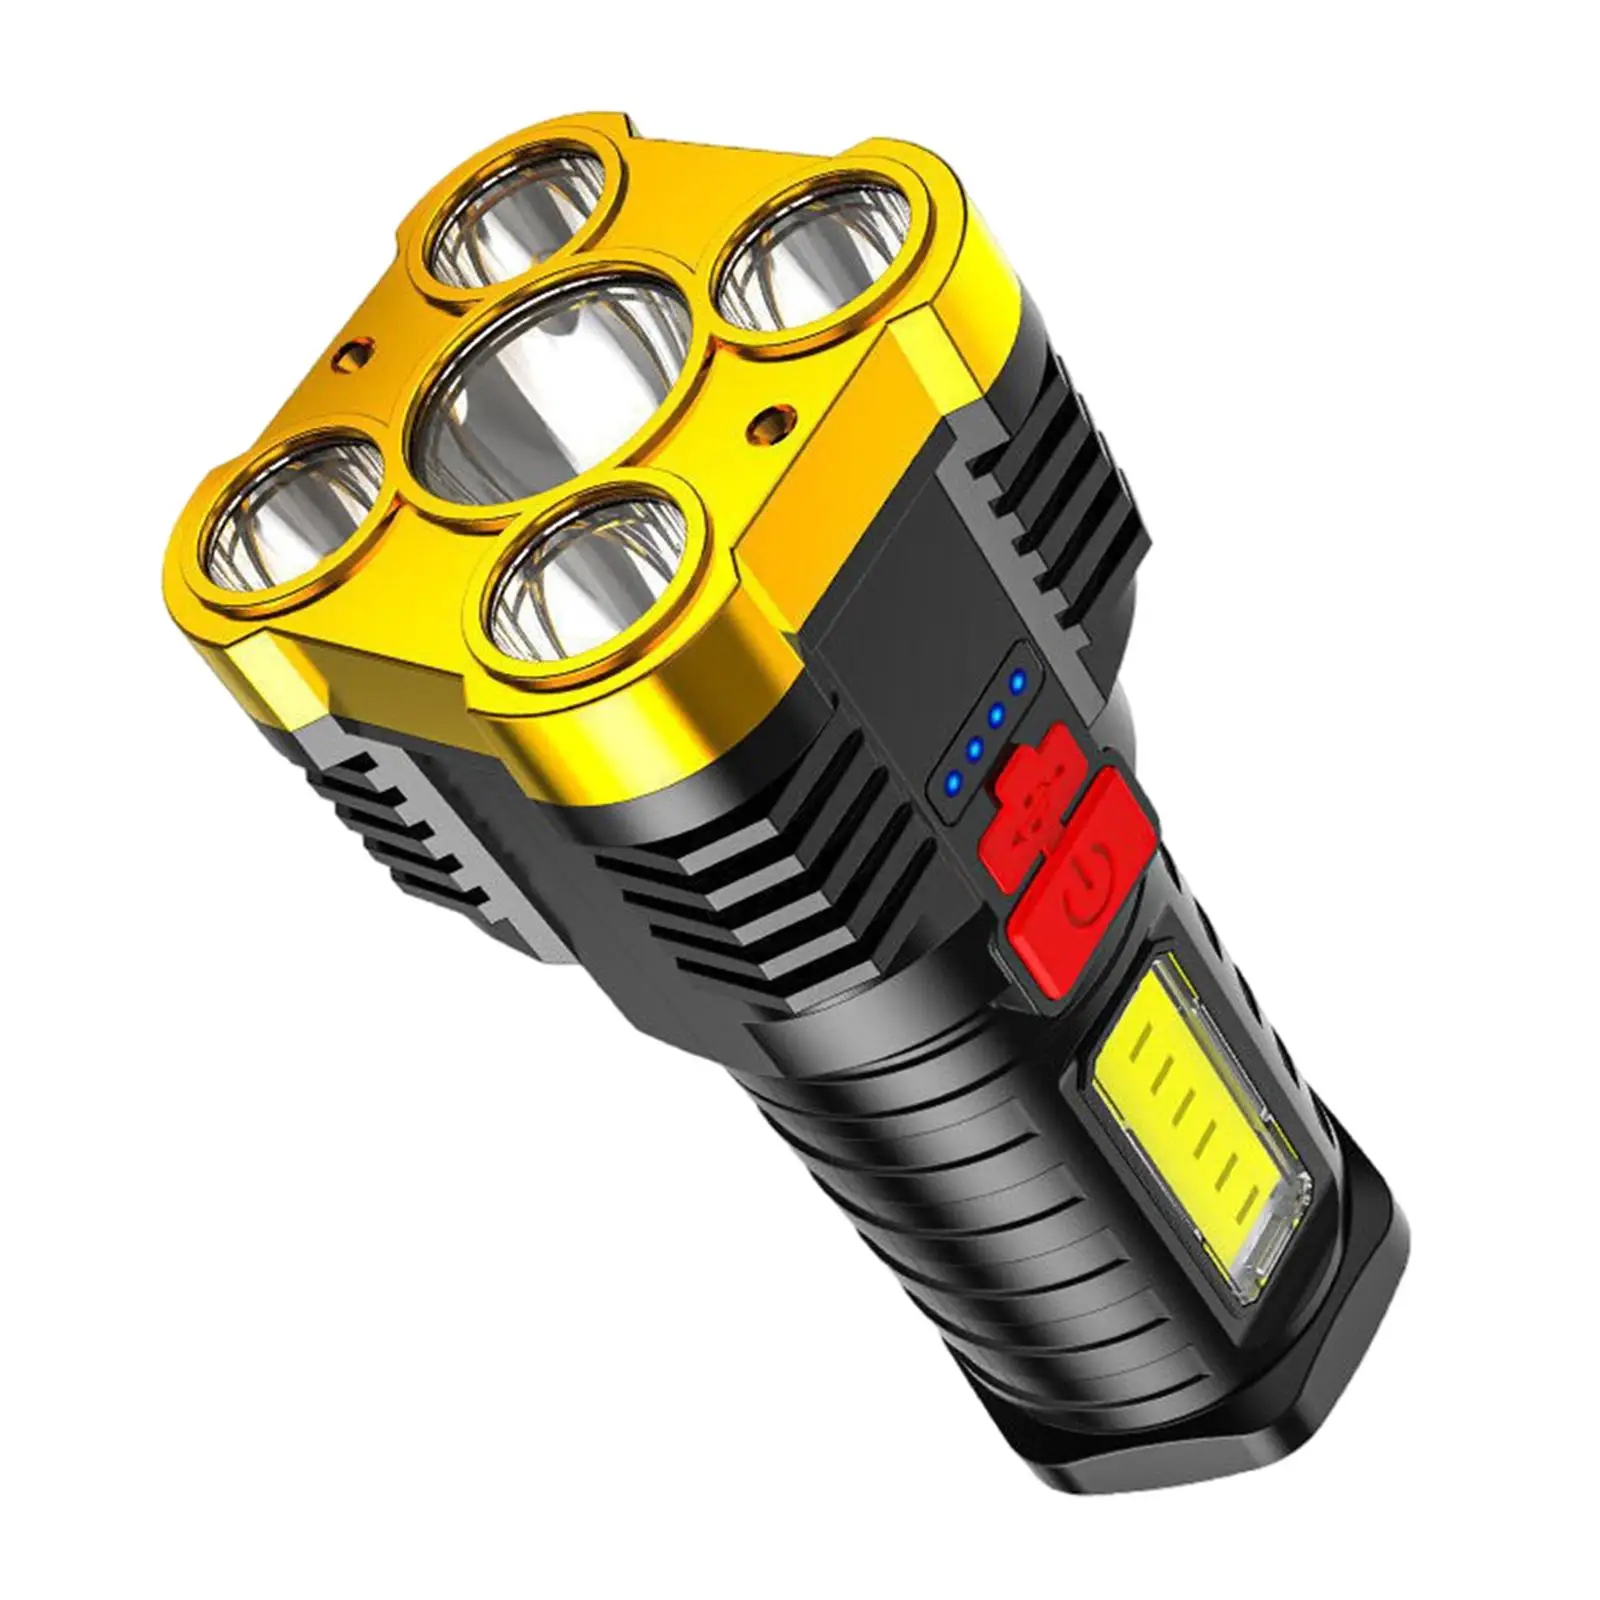 Five  Handheld Led  Flashlight Powerful Searchlight USB Rechargeable Large Capacity Battery Long Lasting Camping Light